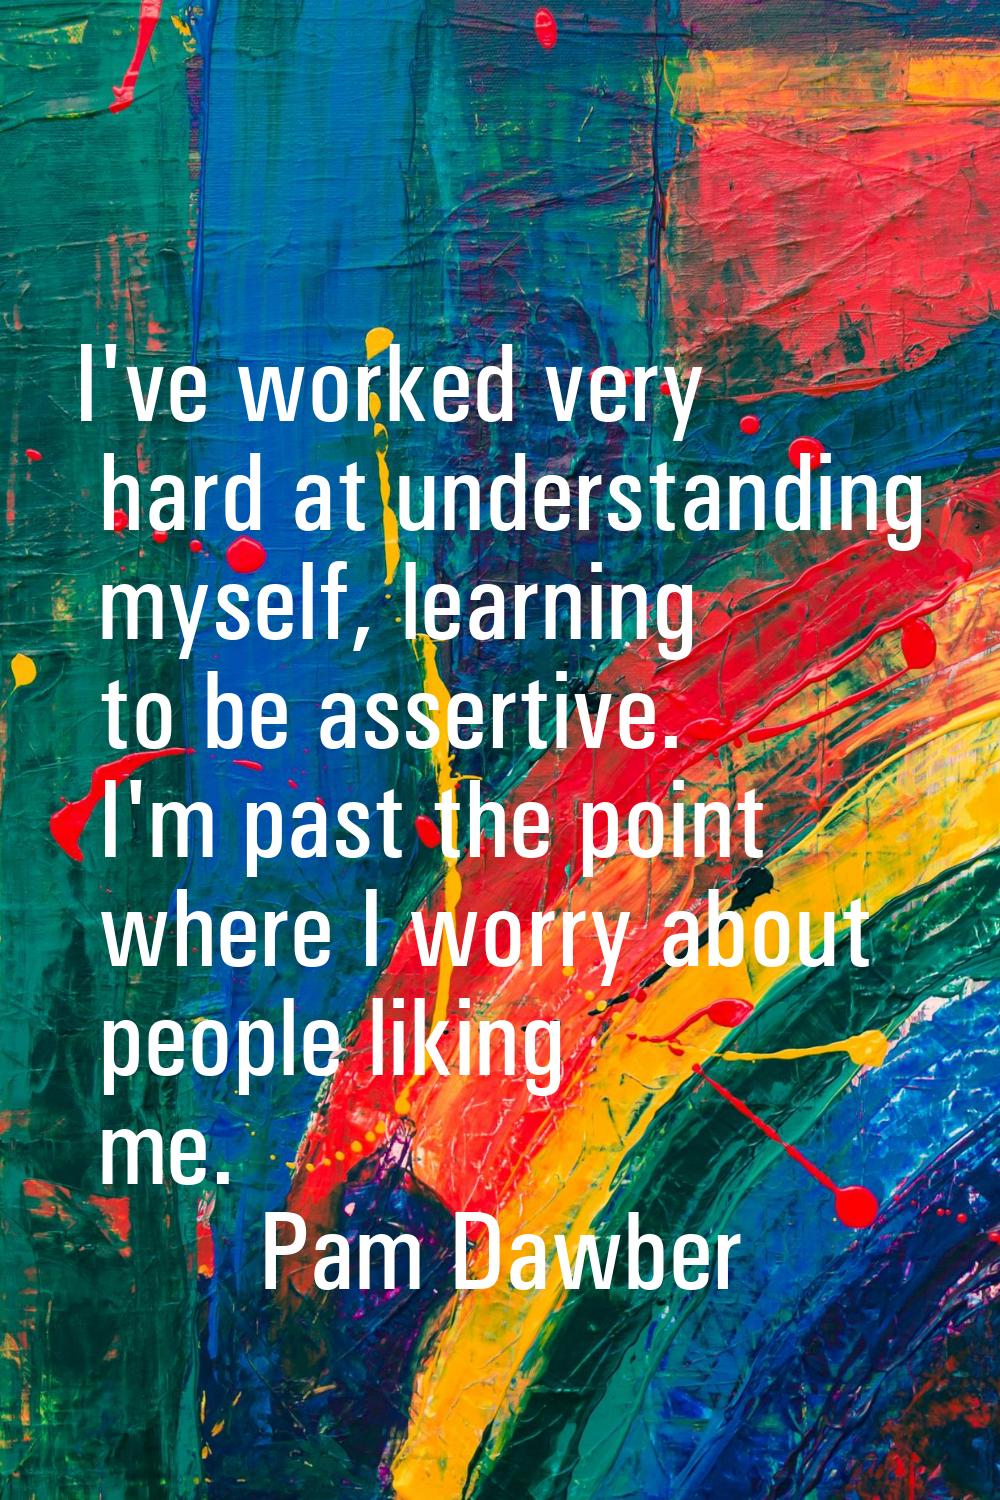 I've worked very hard at understanding myself, learning to be assertive. I'm past the point where I